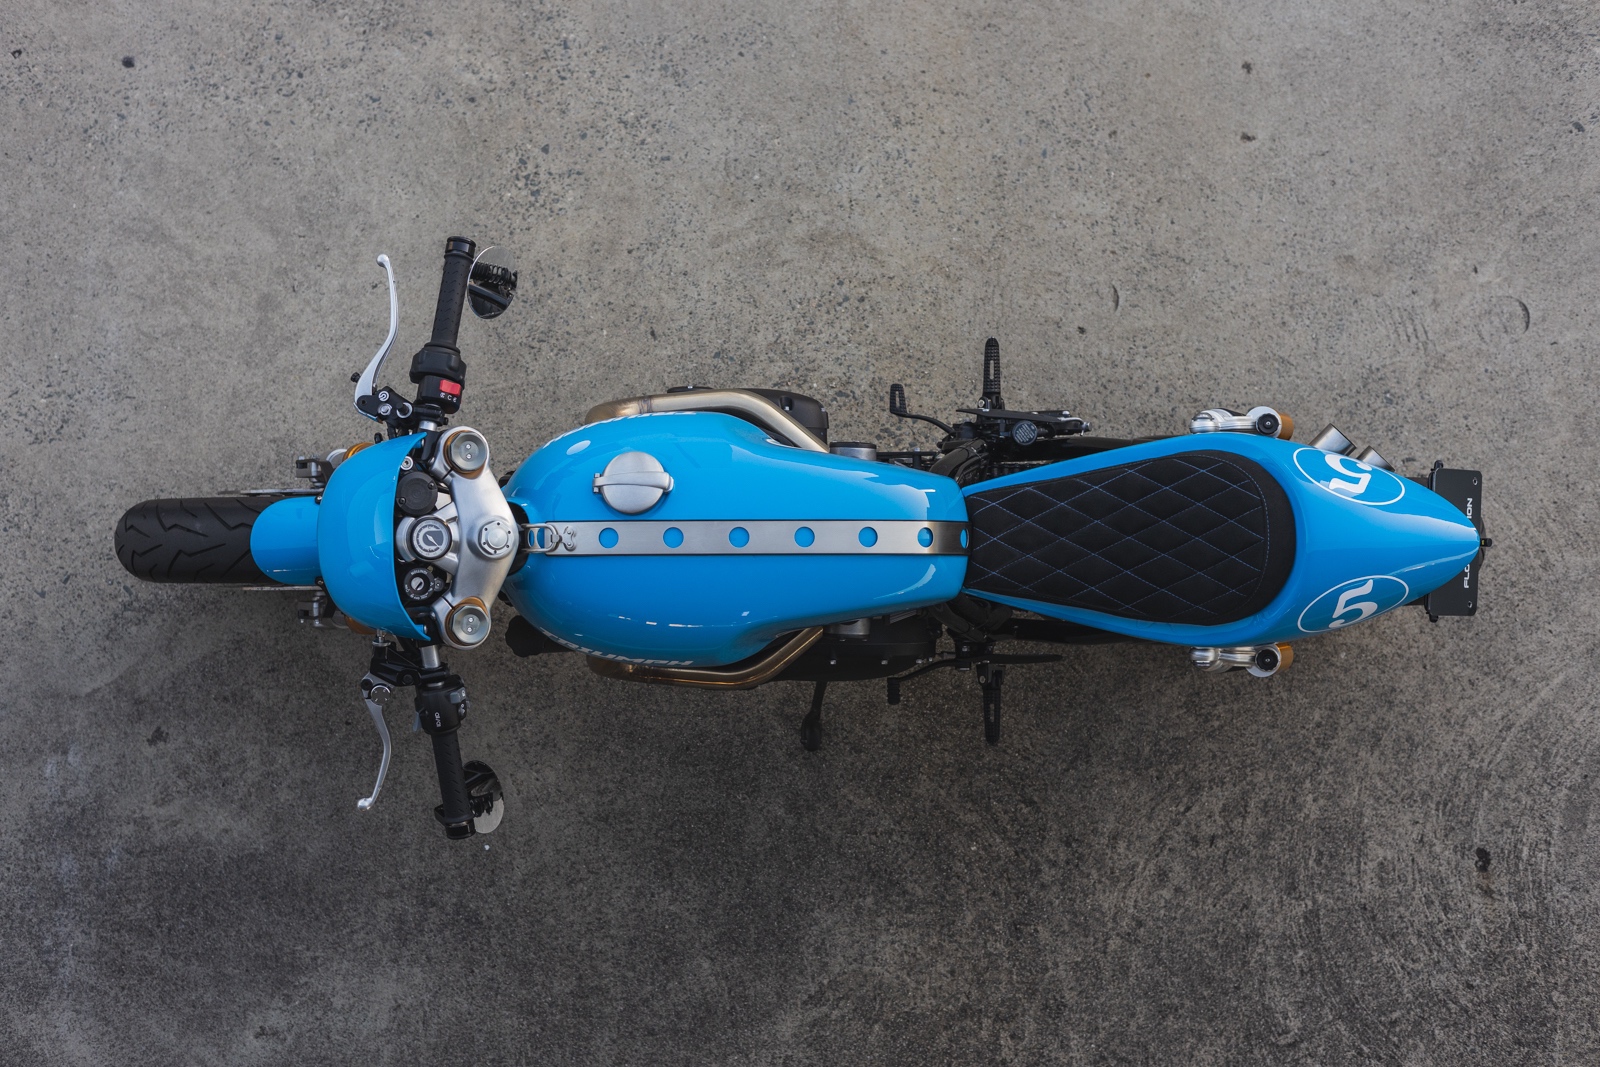 Photo of a Triumph Thruxton R Custom Motorcycle from above